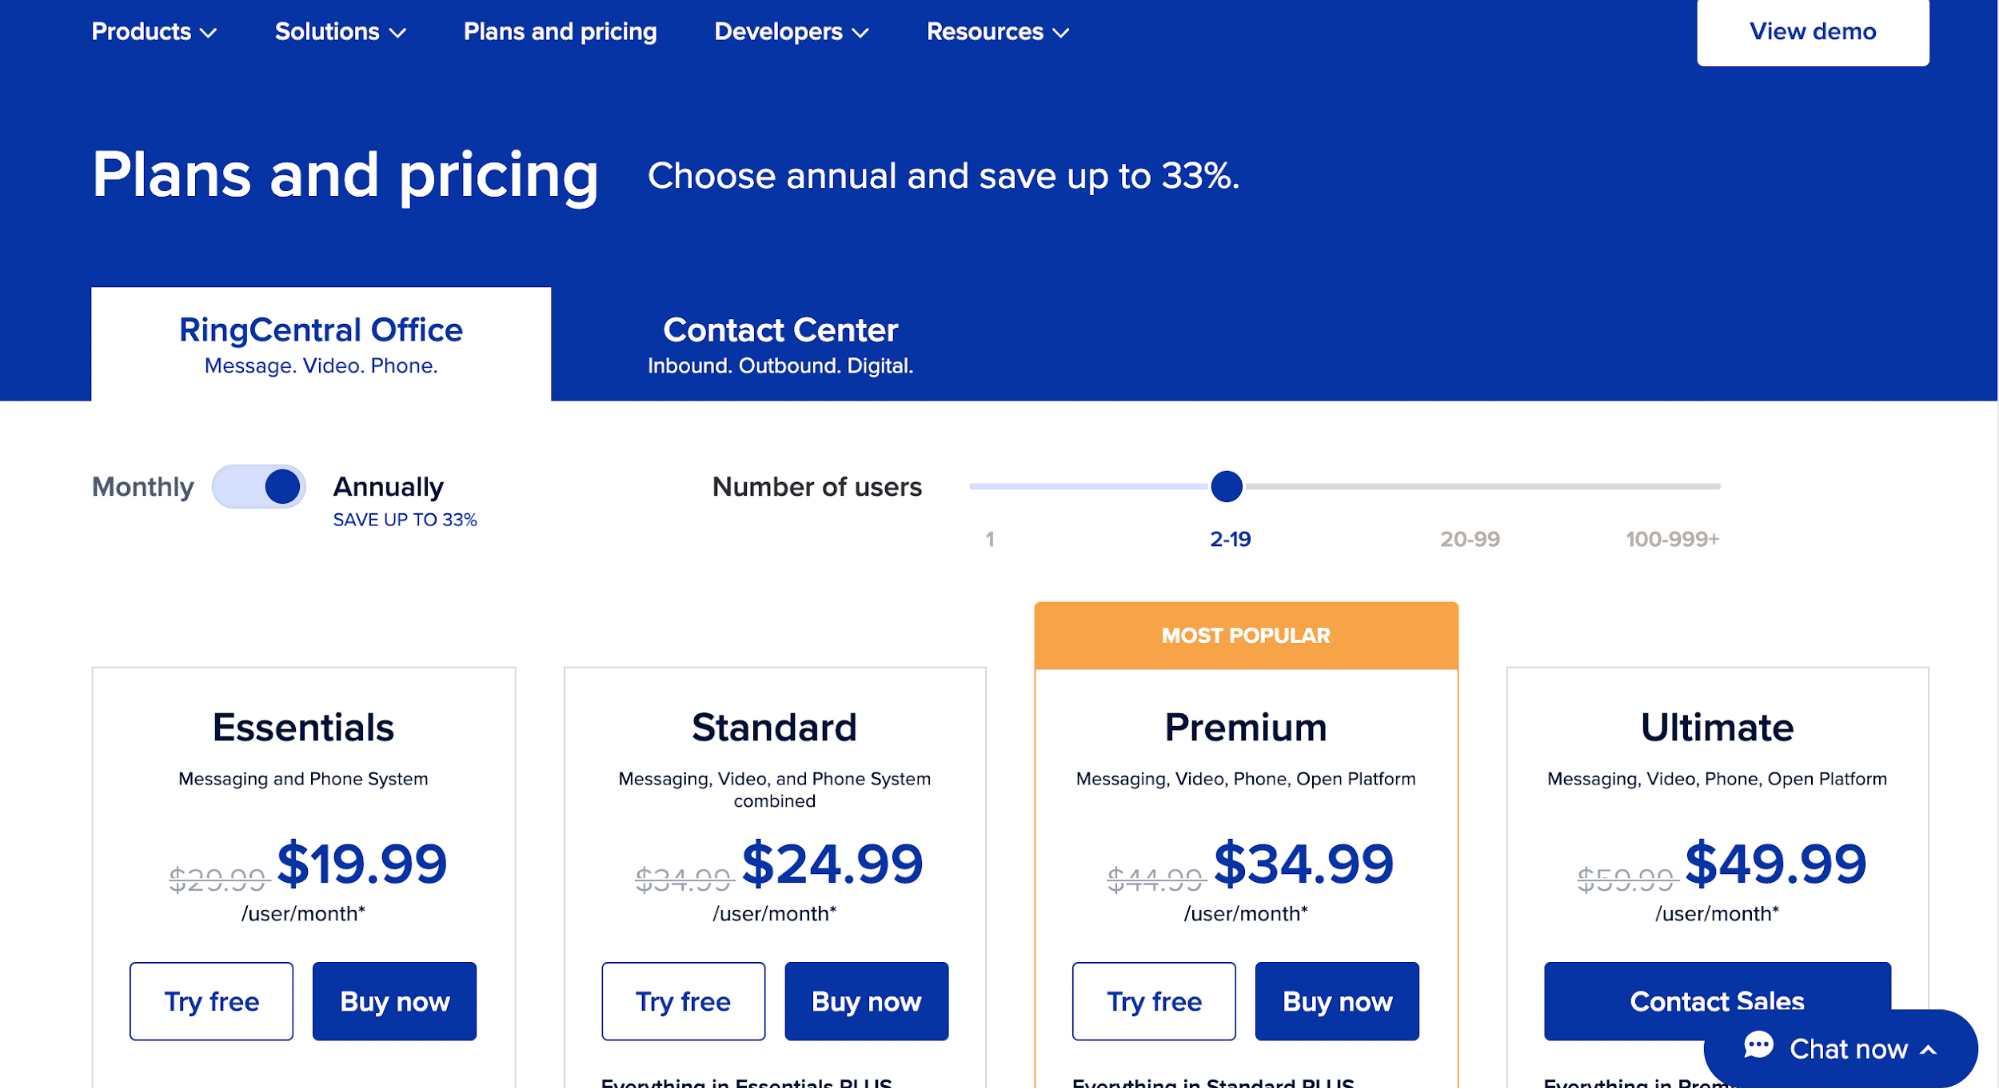 Screenshot from RingCentral's Plans and Pricing Page